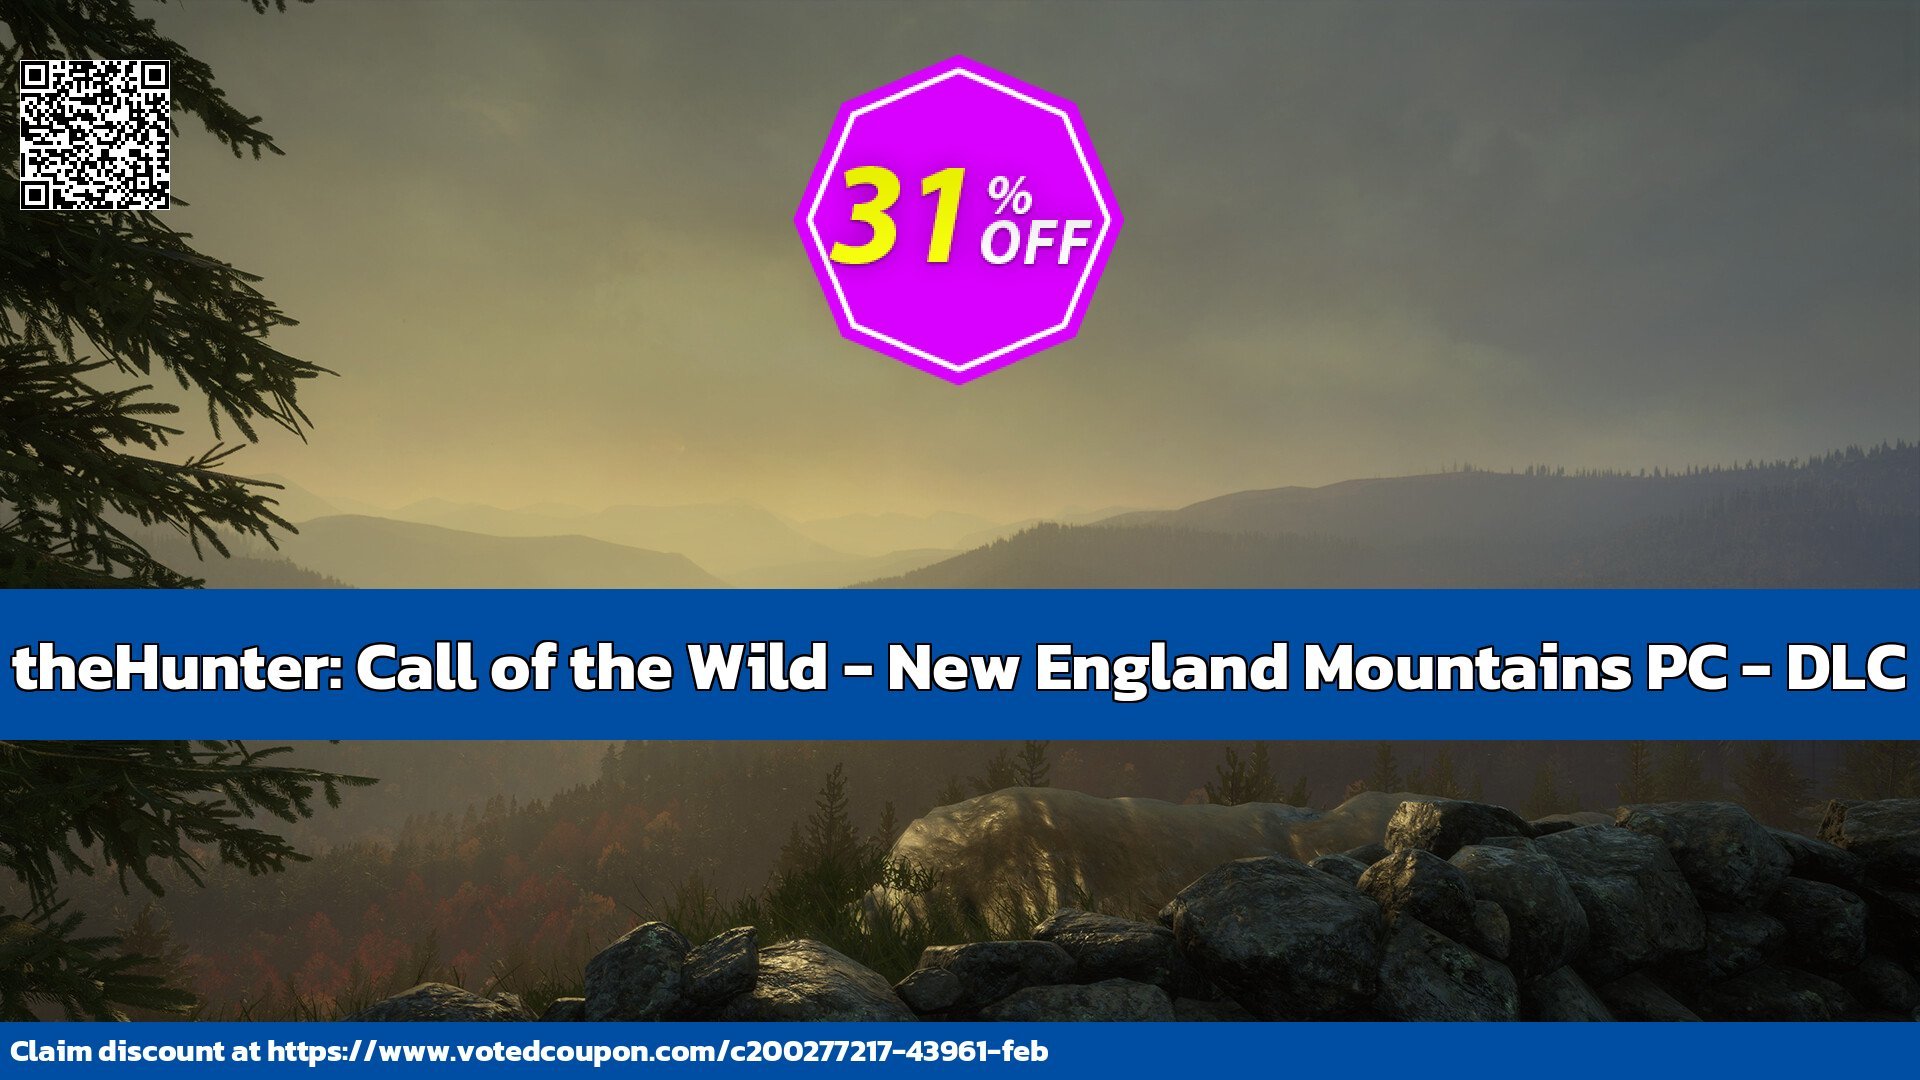 theHunter: Call of the Wild - New England Mountains PC - DLC Coupon Code May 2024, 32% OFF - VotedCoupon